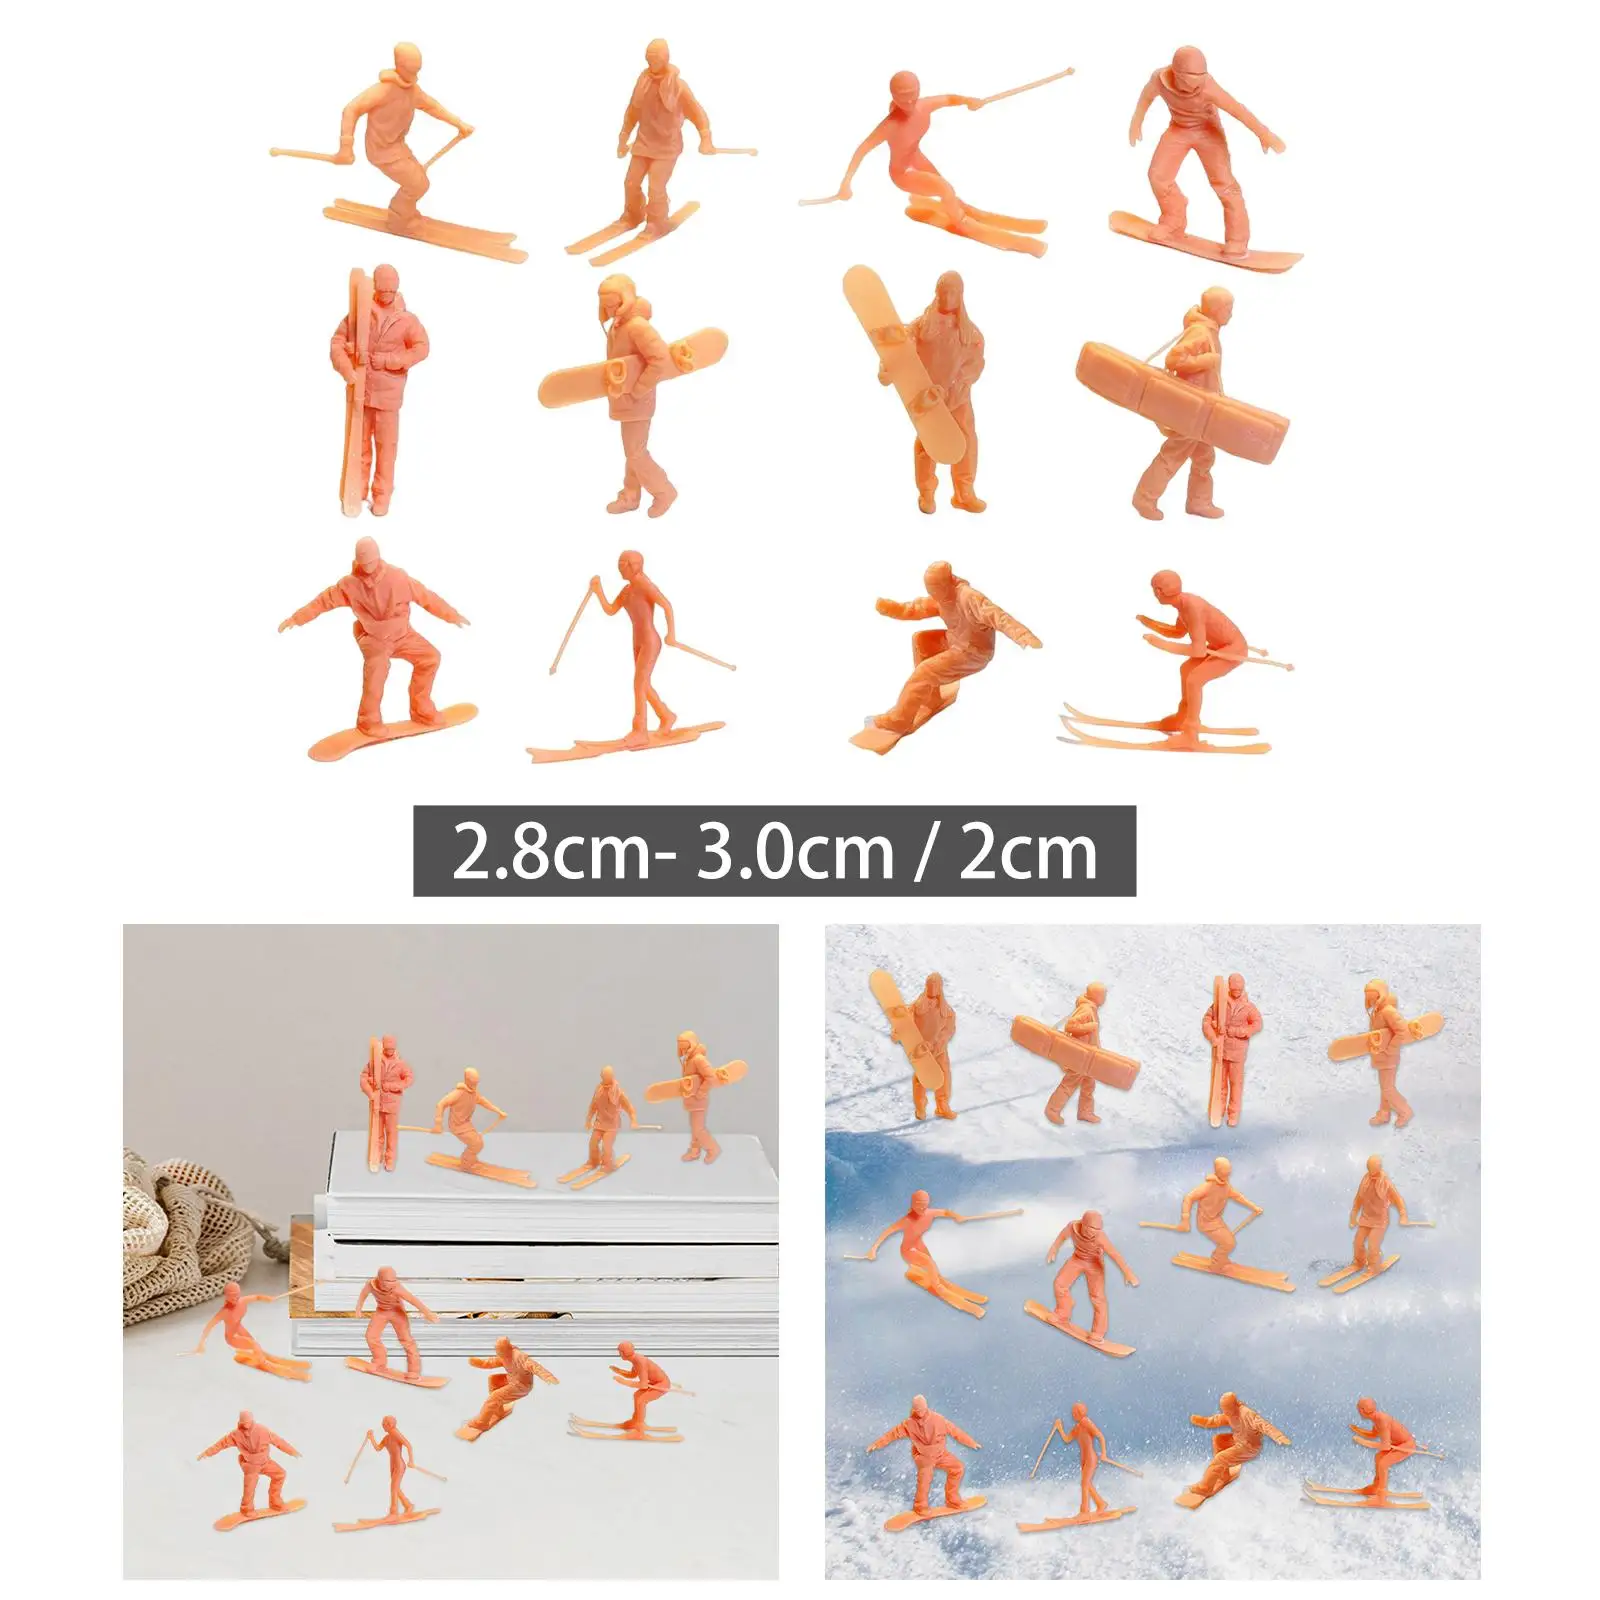 Simulation Skiing Figures Scenery Landscape Layout for Diorama Sand Table Layout